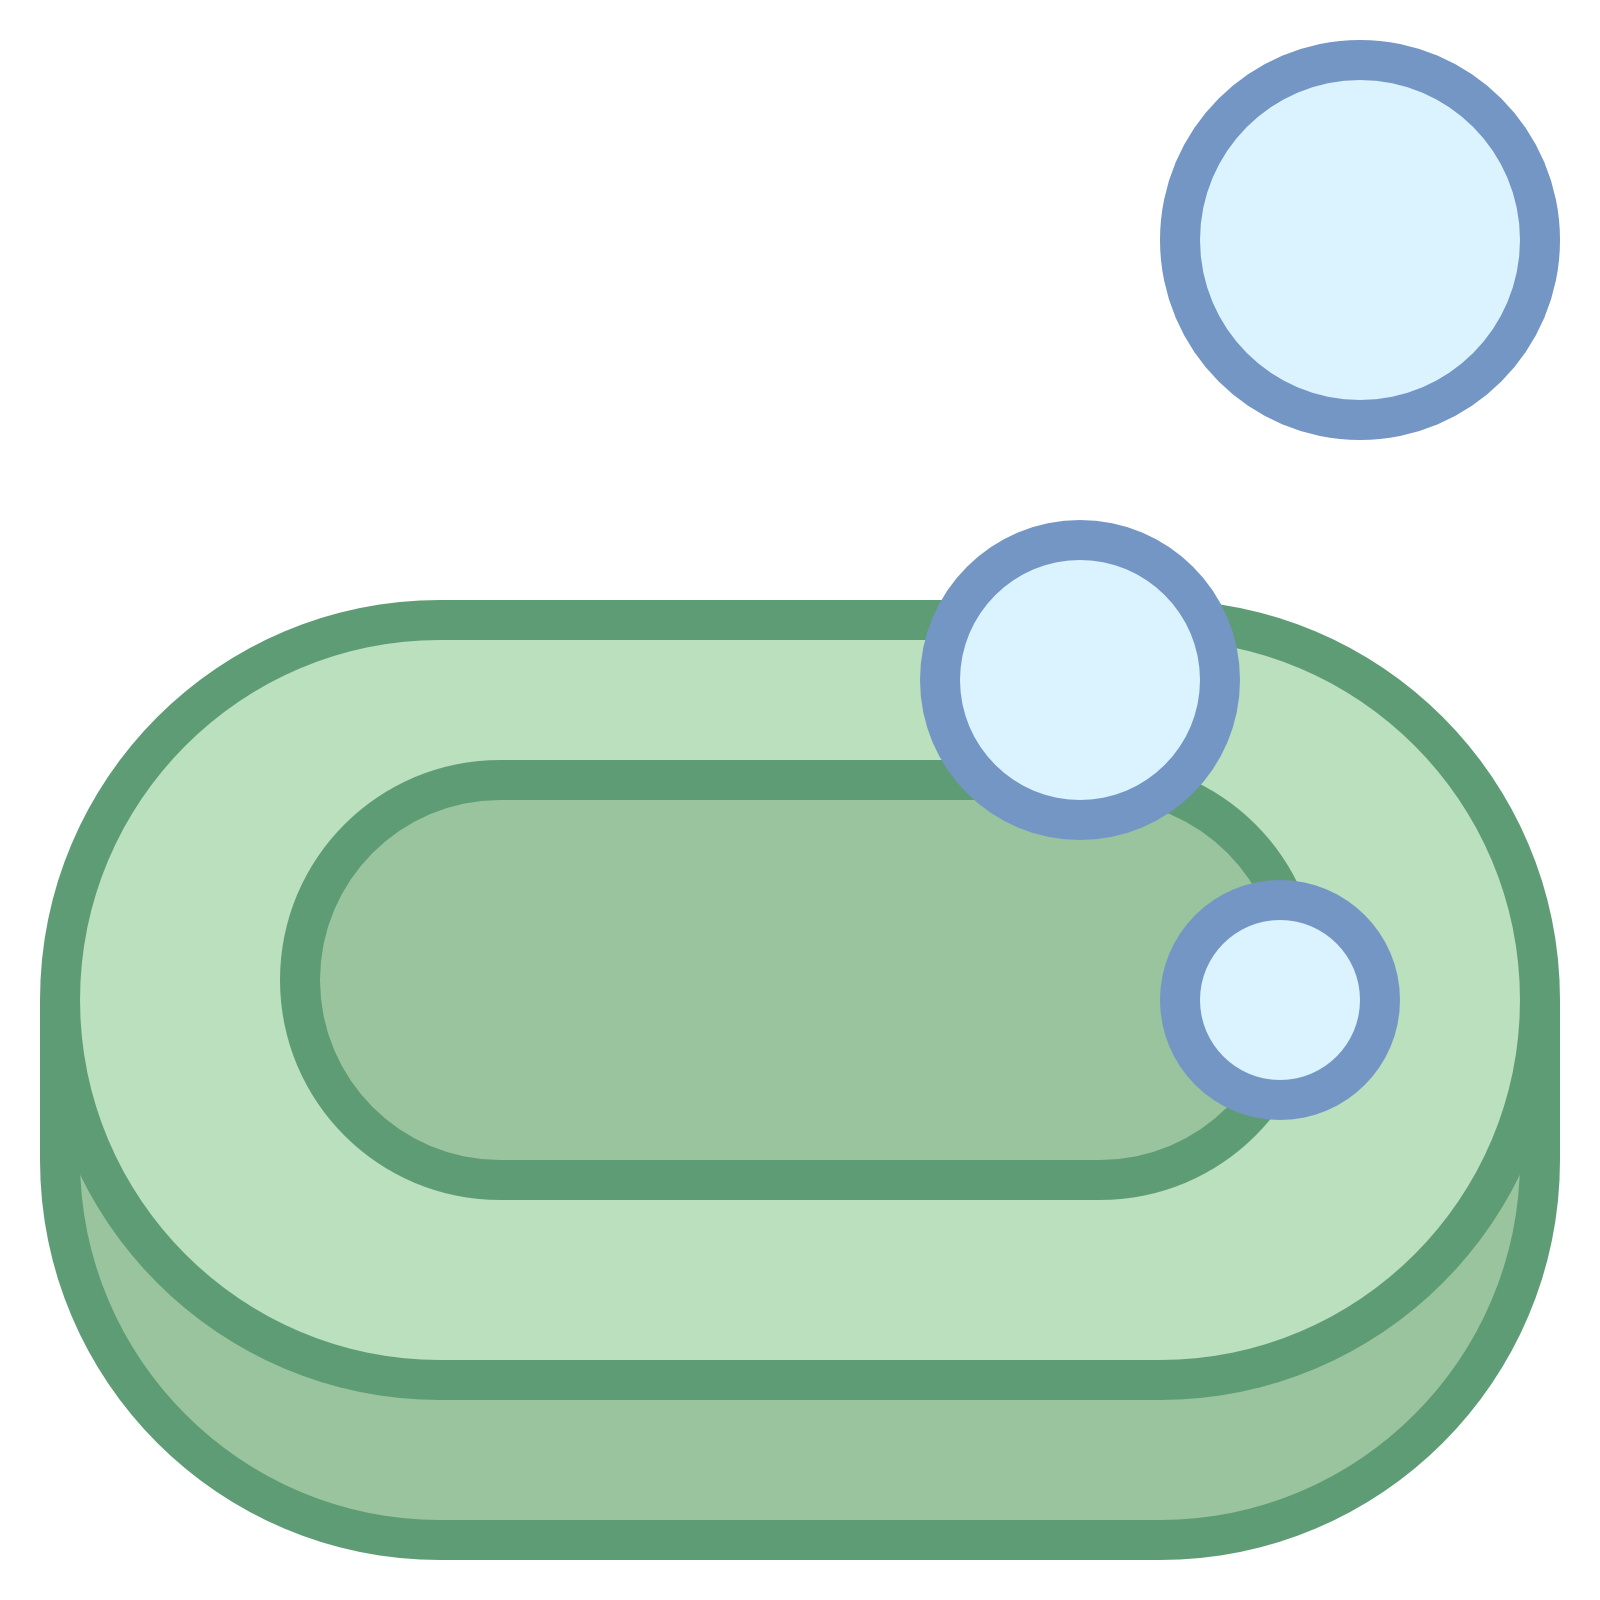 Green,Clip art,Line,Rectangle,Circle,Oval